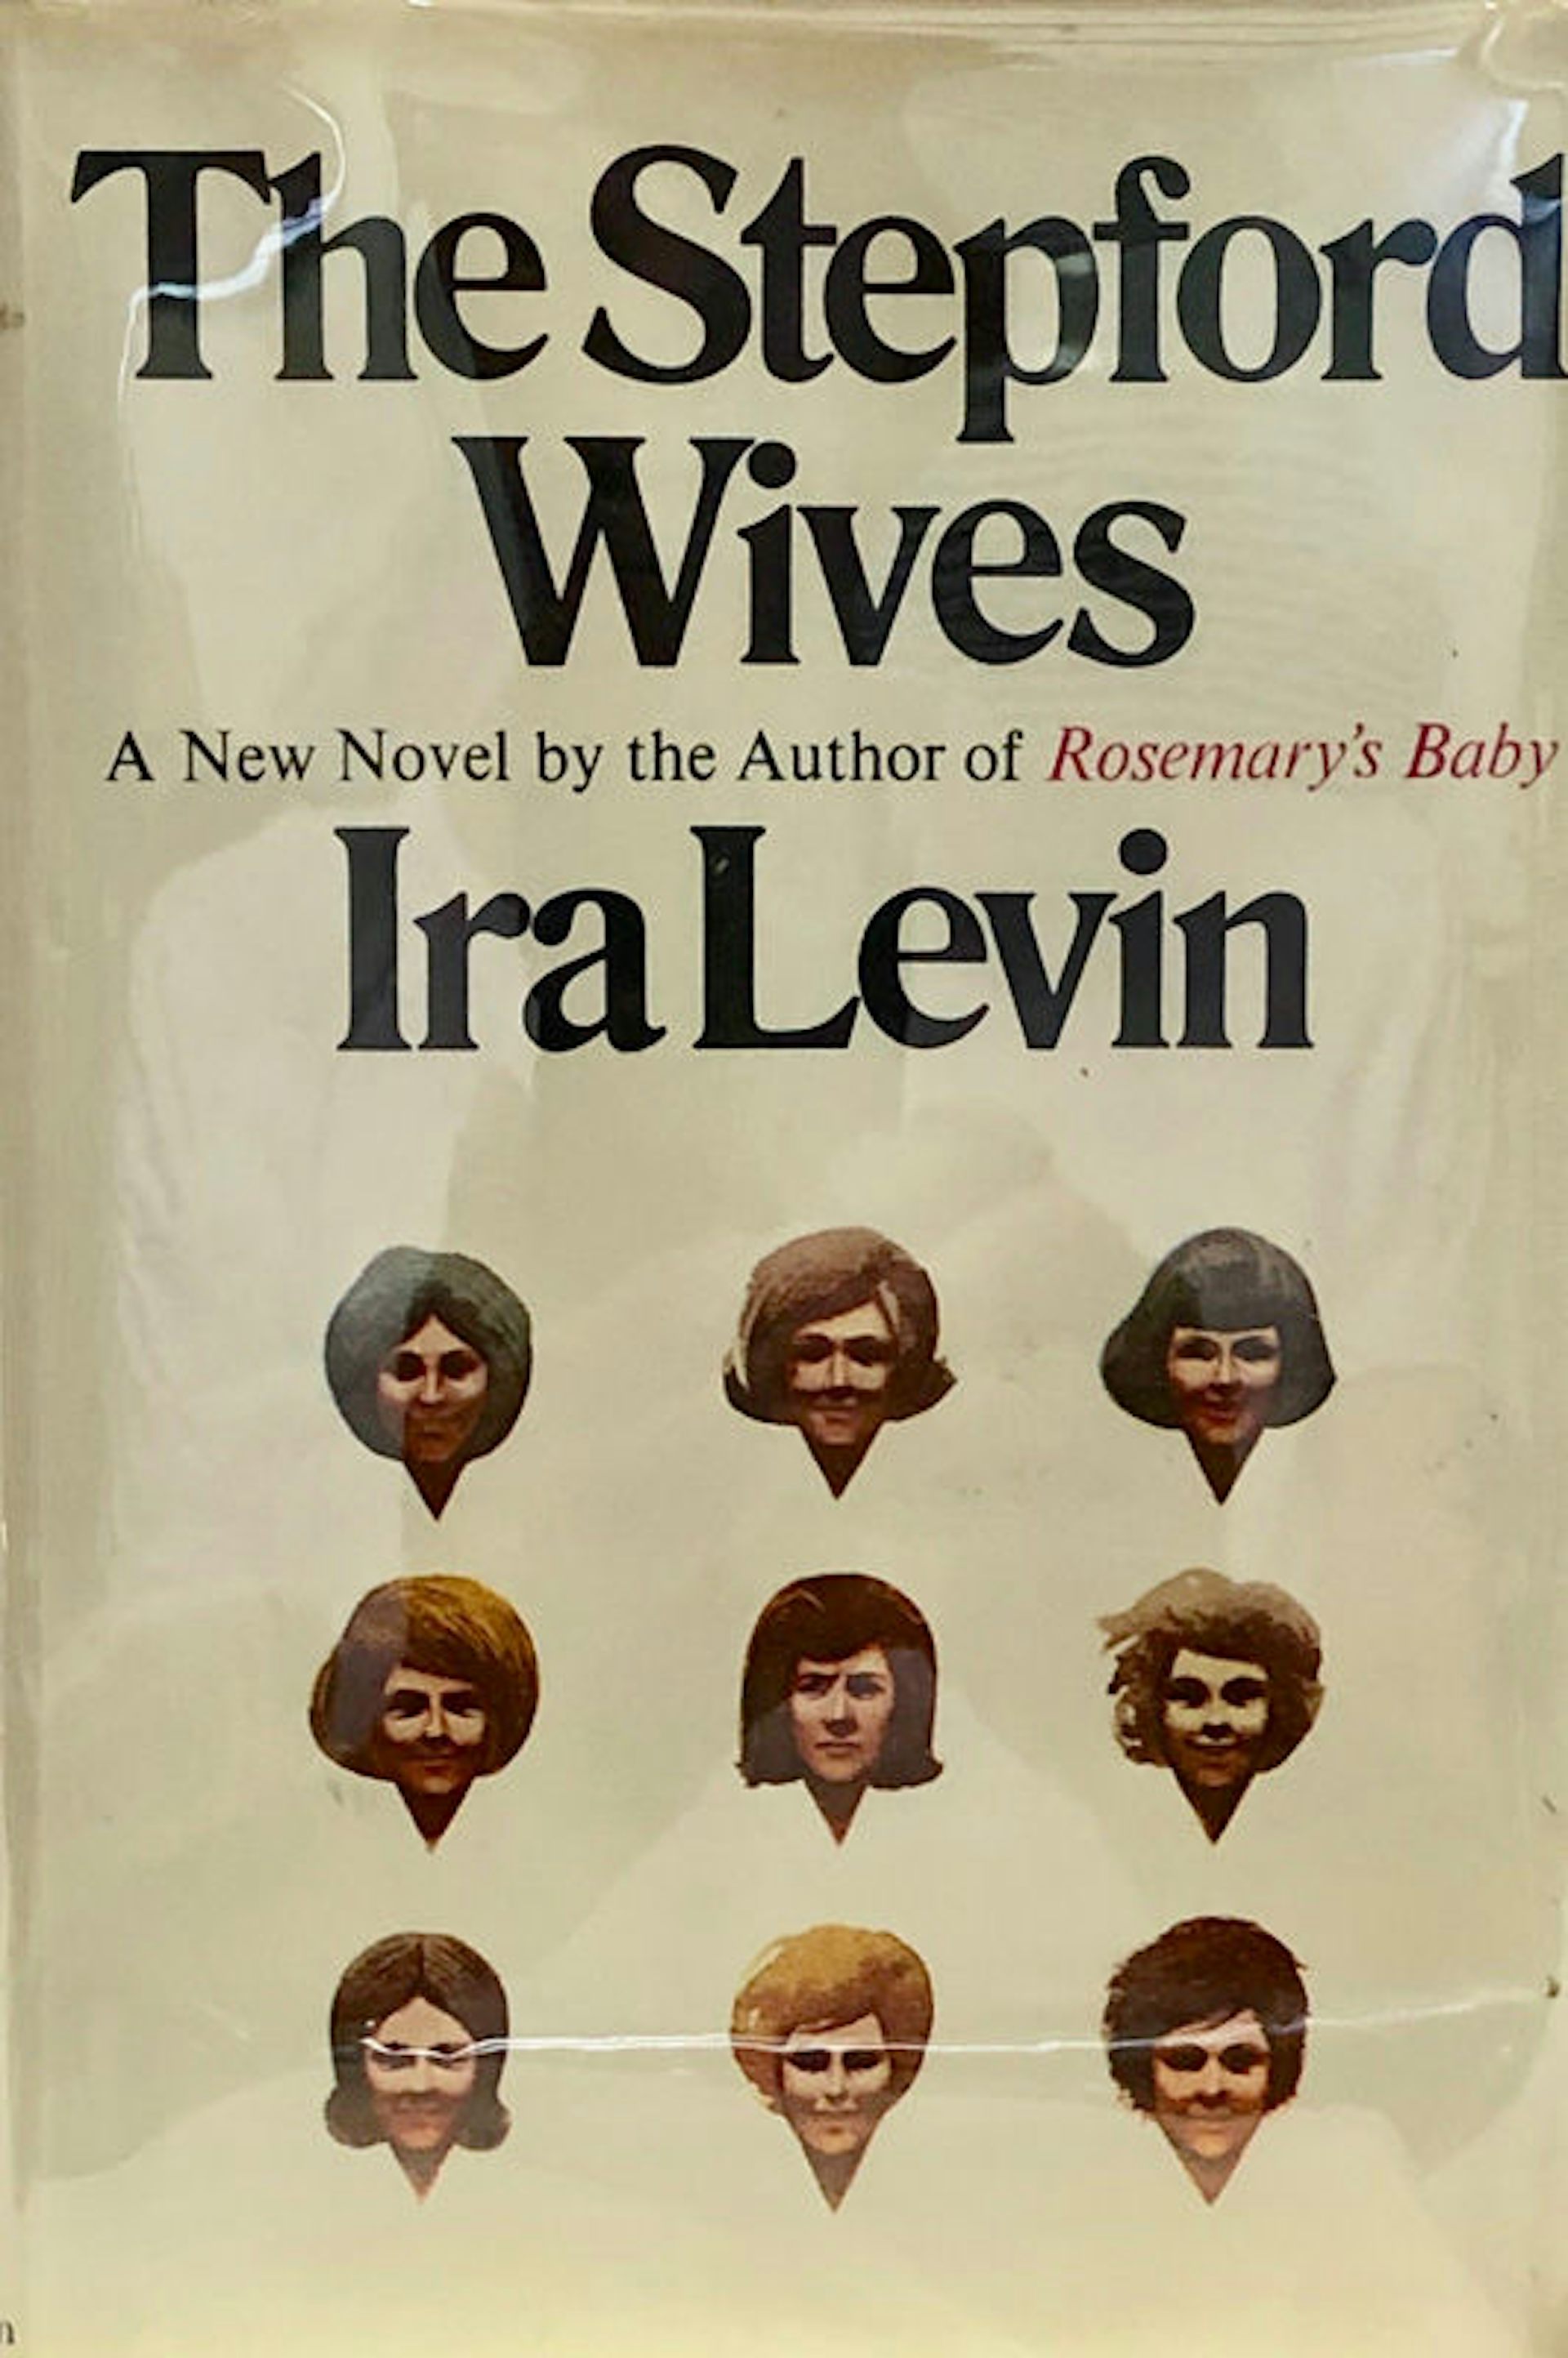 Suburban living did turn women into robots why feminist horror novel The Stepford Wives is still relevant, 50 years on